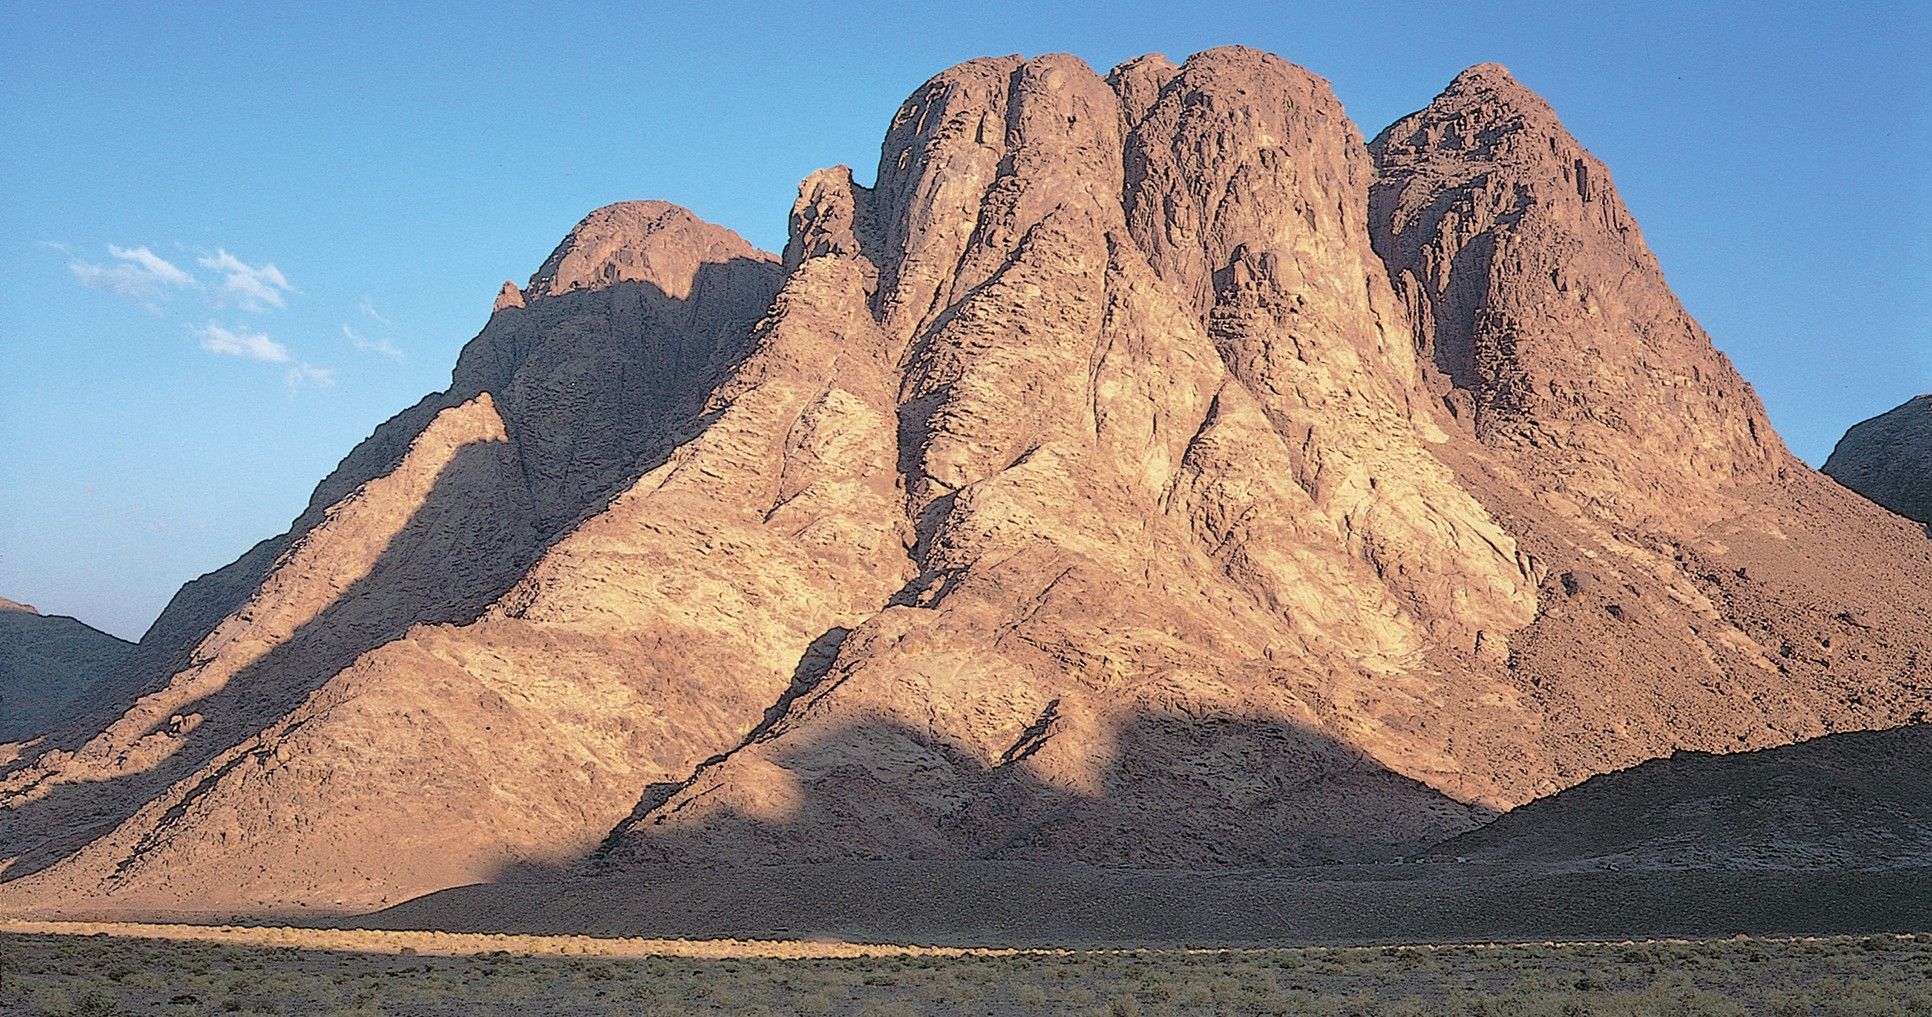 A mountain in Egypt traditionally believed to be Mount Sinai. Image via Church of Jesus Christ.